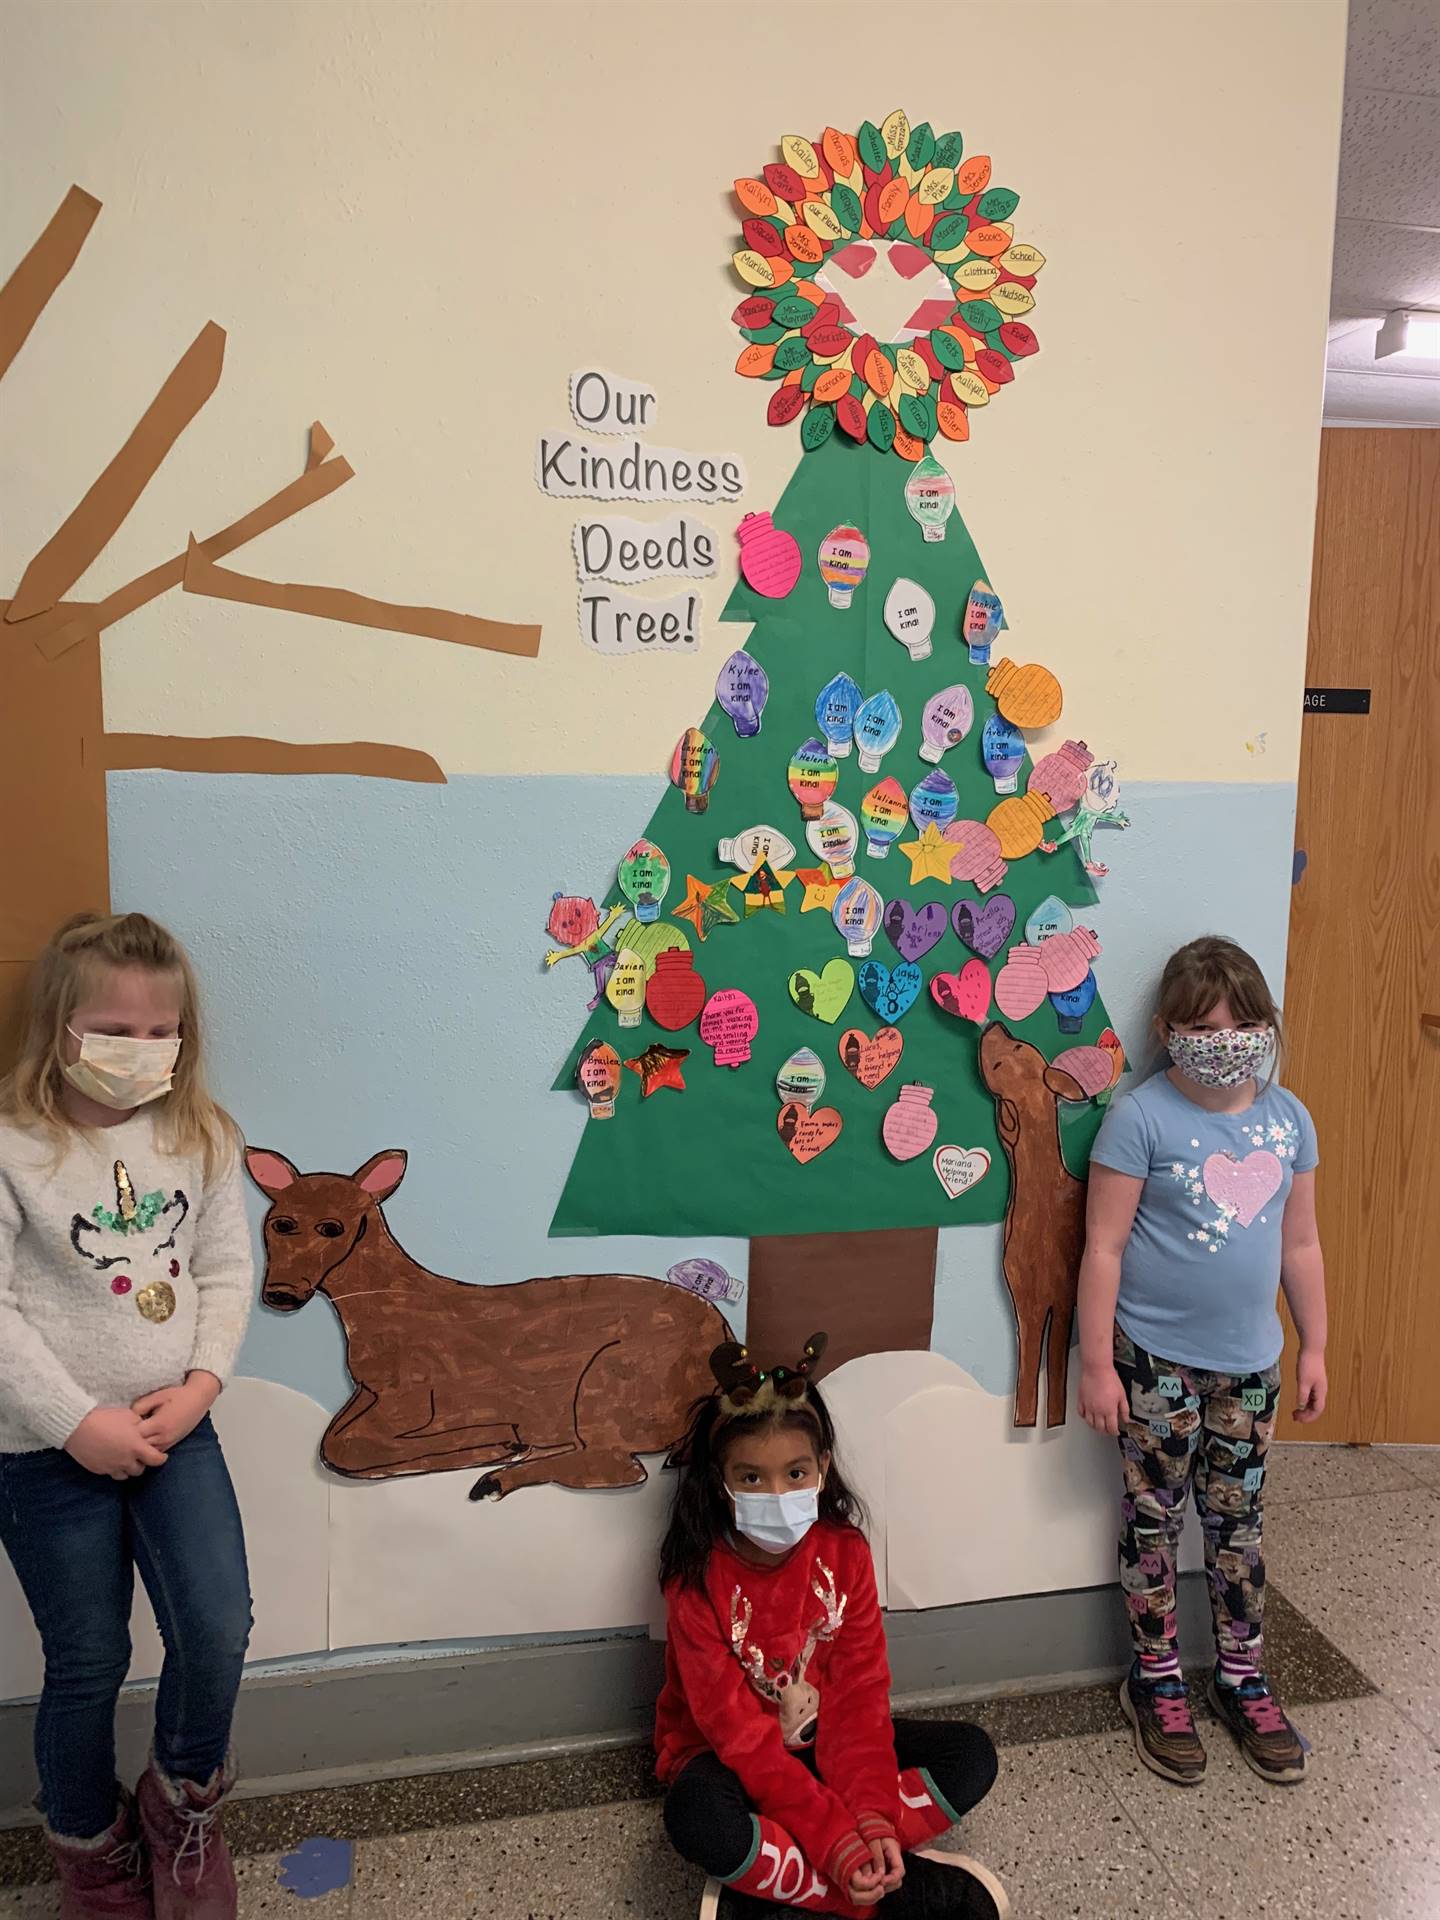 3 students with a paper evergreen tree topped with a light bulb wreath and covered in various colore